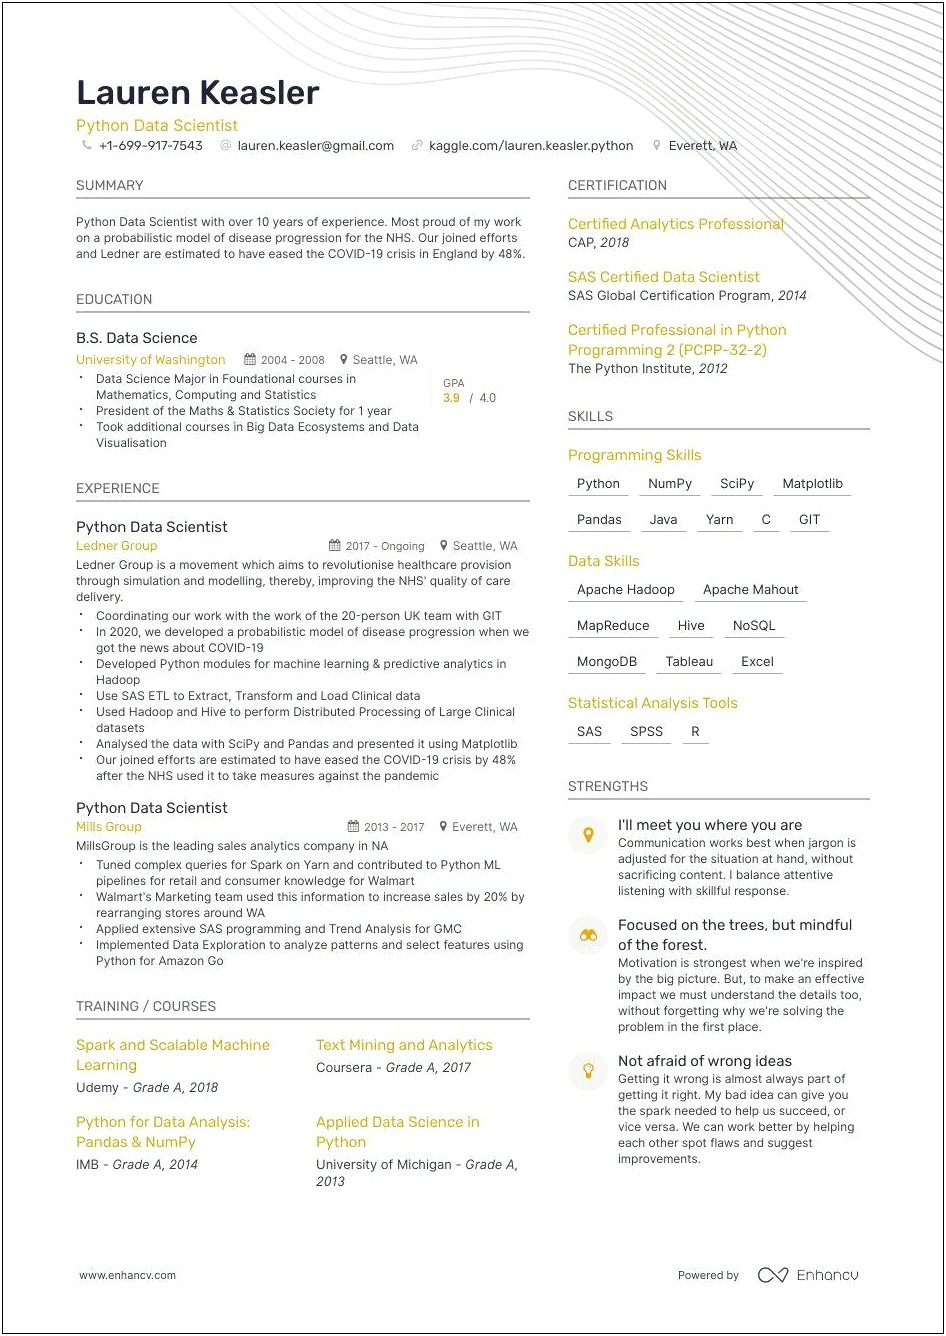 Resume Executive Summary Passion For Data Science